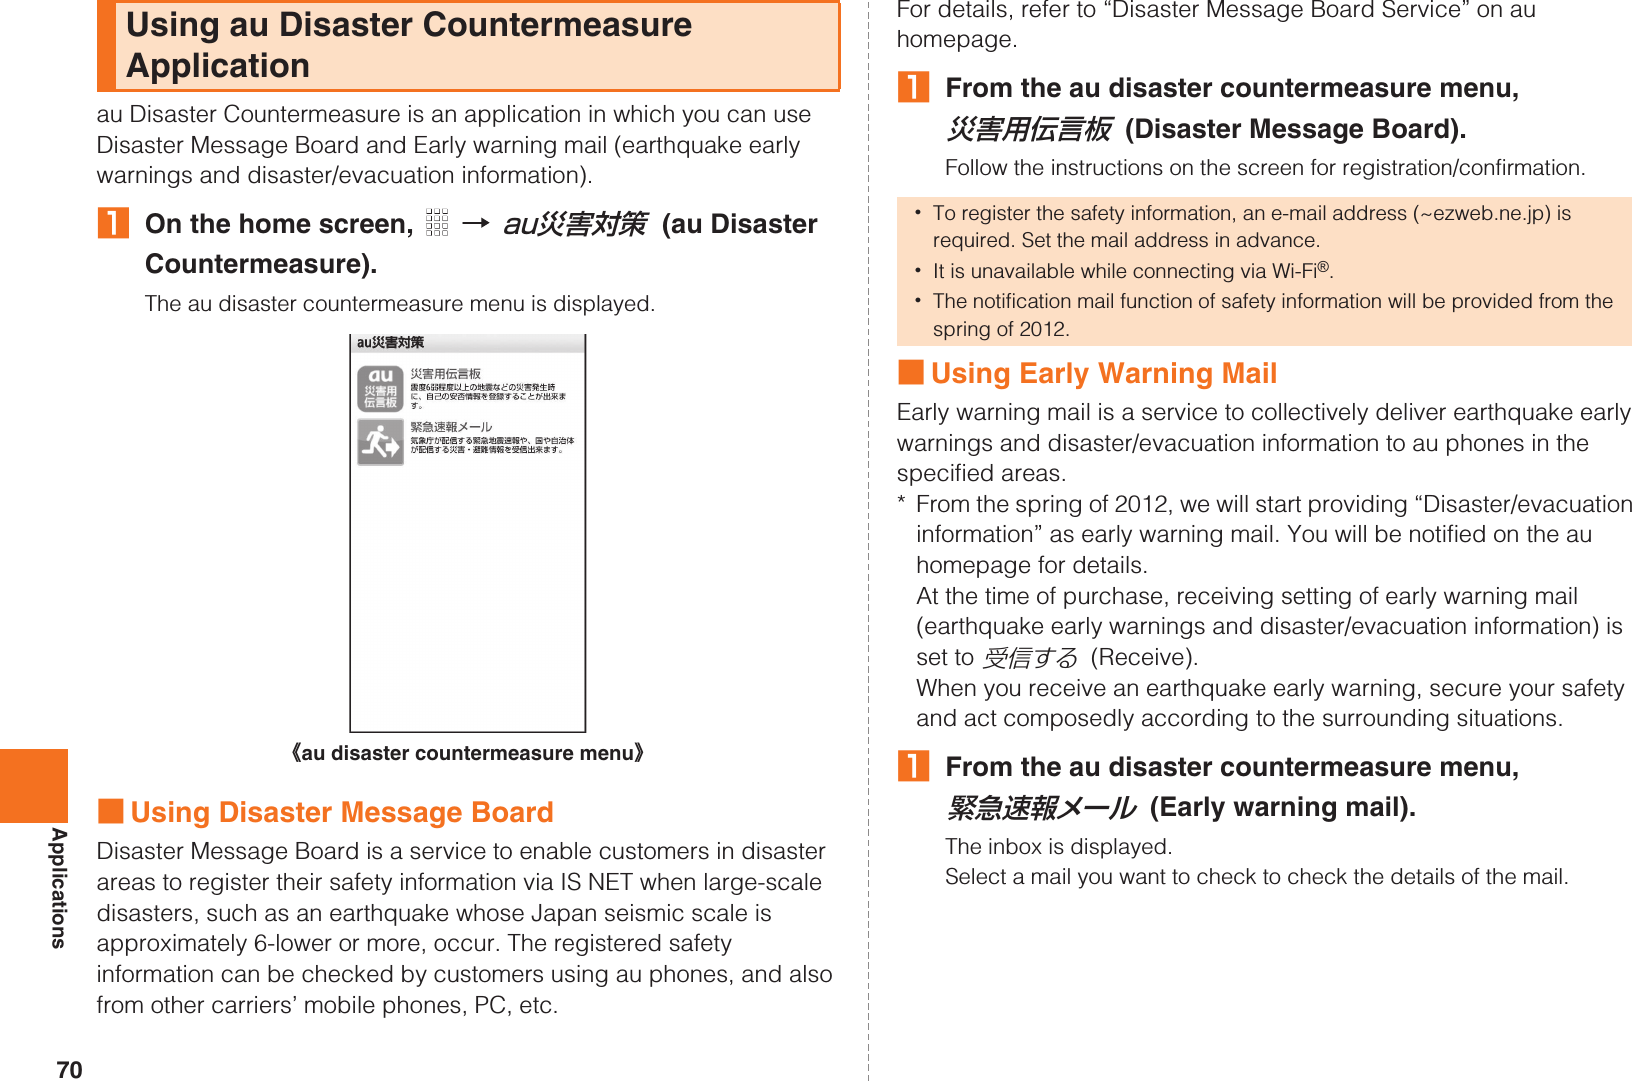 70Applicationsau Disaster Countermeasure is an application in which you can use Disaster Message Board and Early warning mail (earthquake early warnings and disaster/evacuation information).AOn the home screen,   [ (au Disaster Countermeasure).The au disaster countermeasure menu is displayed.■Using Disaster Message BoardDisaster Message Board is a service to enable customers in disaster areas to register their safety information via IS NET when large-scale disasters, such as an earthquake whose Japan seismic scale is approximately 6-lower or more, occur. The registered safety information can be checked by customers using au phones, and also from other carriers’ mobile phones, PC, etc.For details, refer to “Disaster Message Board Service” on au homepage.AFrom the au disaster countermeasure menu,  (Disaster Message Board).Follow the instructions on the screen for registration/confirmation.■Using Early Warning MailEarly warning mail is a service to collectively deliver earthquake early warnings and disaster/evacuation information to au phones in the specified areas.* From the spring of 2012, we will start providing “Disaster/evacuation information” as early warning mail. You will be notified on the au homepage for details.At the time of purchase, receiving setting of early warning mail (earthquake early warnings and disaster/evacuation information) is set to   (Receive).When you receive an earthquake early warning, secure your safety and act composedly according to the surrounding situations.AFrom the au disaster countermeasure menu,  (Early warning mail).The inbox is displayed.Select a mail you want to check to check the details of the mail.Using au Disaster Countermeasure Applicationau災害対策《au disaster countermeasure menu》•To register the safety information, an e-mail address (~ezweb.ne.jp) is required. Set the mail address in advance.•It is unavailable while connecting via Wi-Fi®.•The notification mail function of safety information will be provided from the spring of 2012.災害用伝言板受信する緊急速報メールKUUJAWGDQQMࡍ࡯ࠫ㧞㧜㧝㧝ᐕ㧝㧞᦬㧝ᣣޓᧁᦐᣣޓඦᓟ㧡ᤨ㧝㧥ಽ